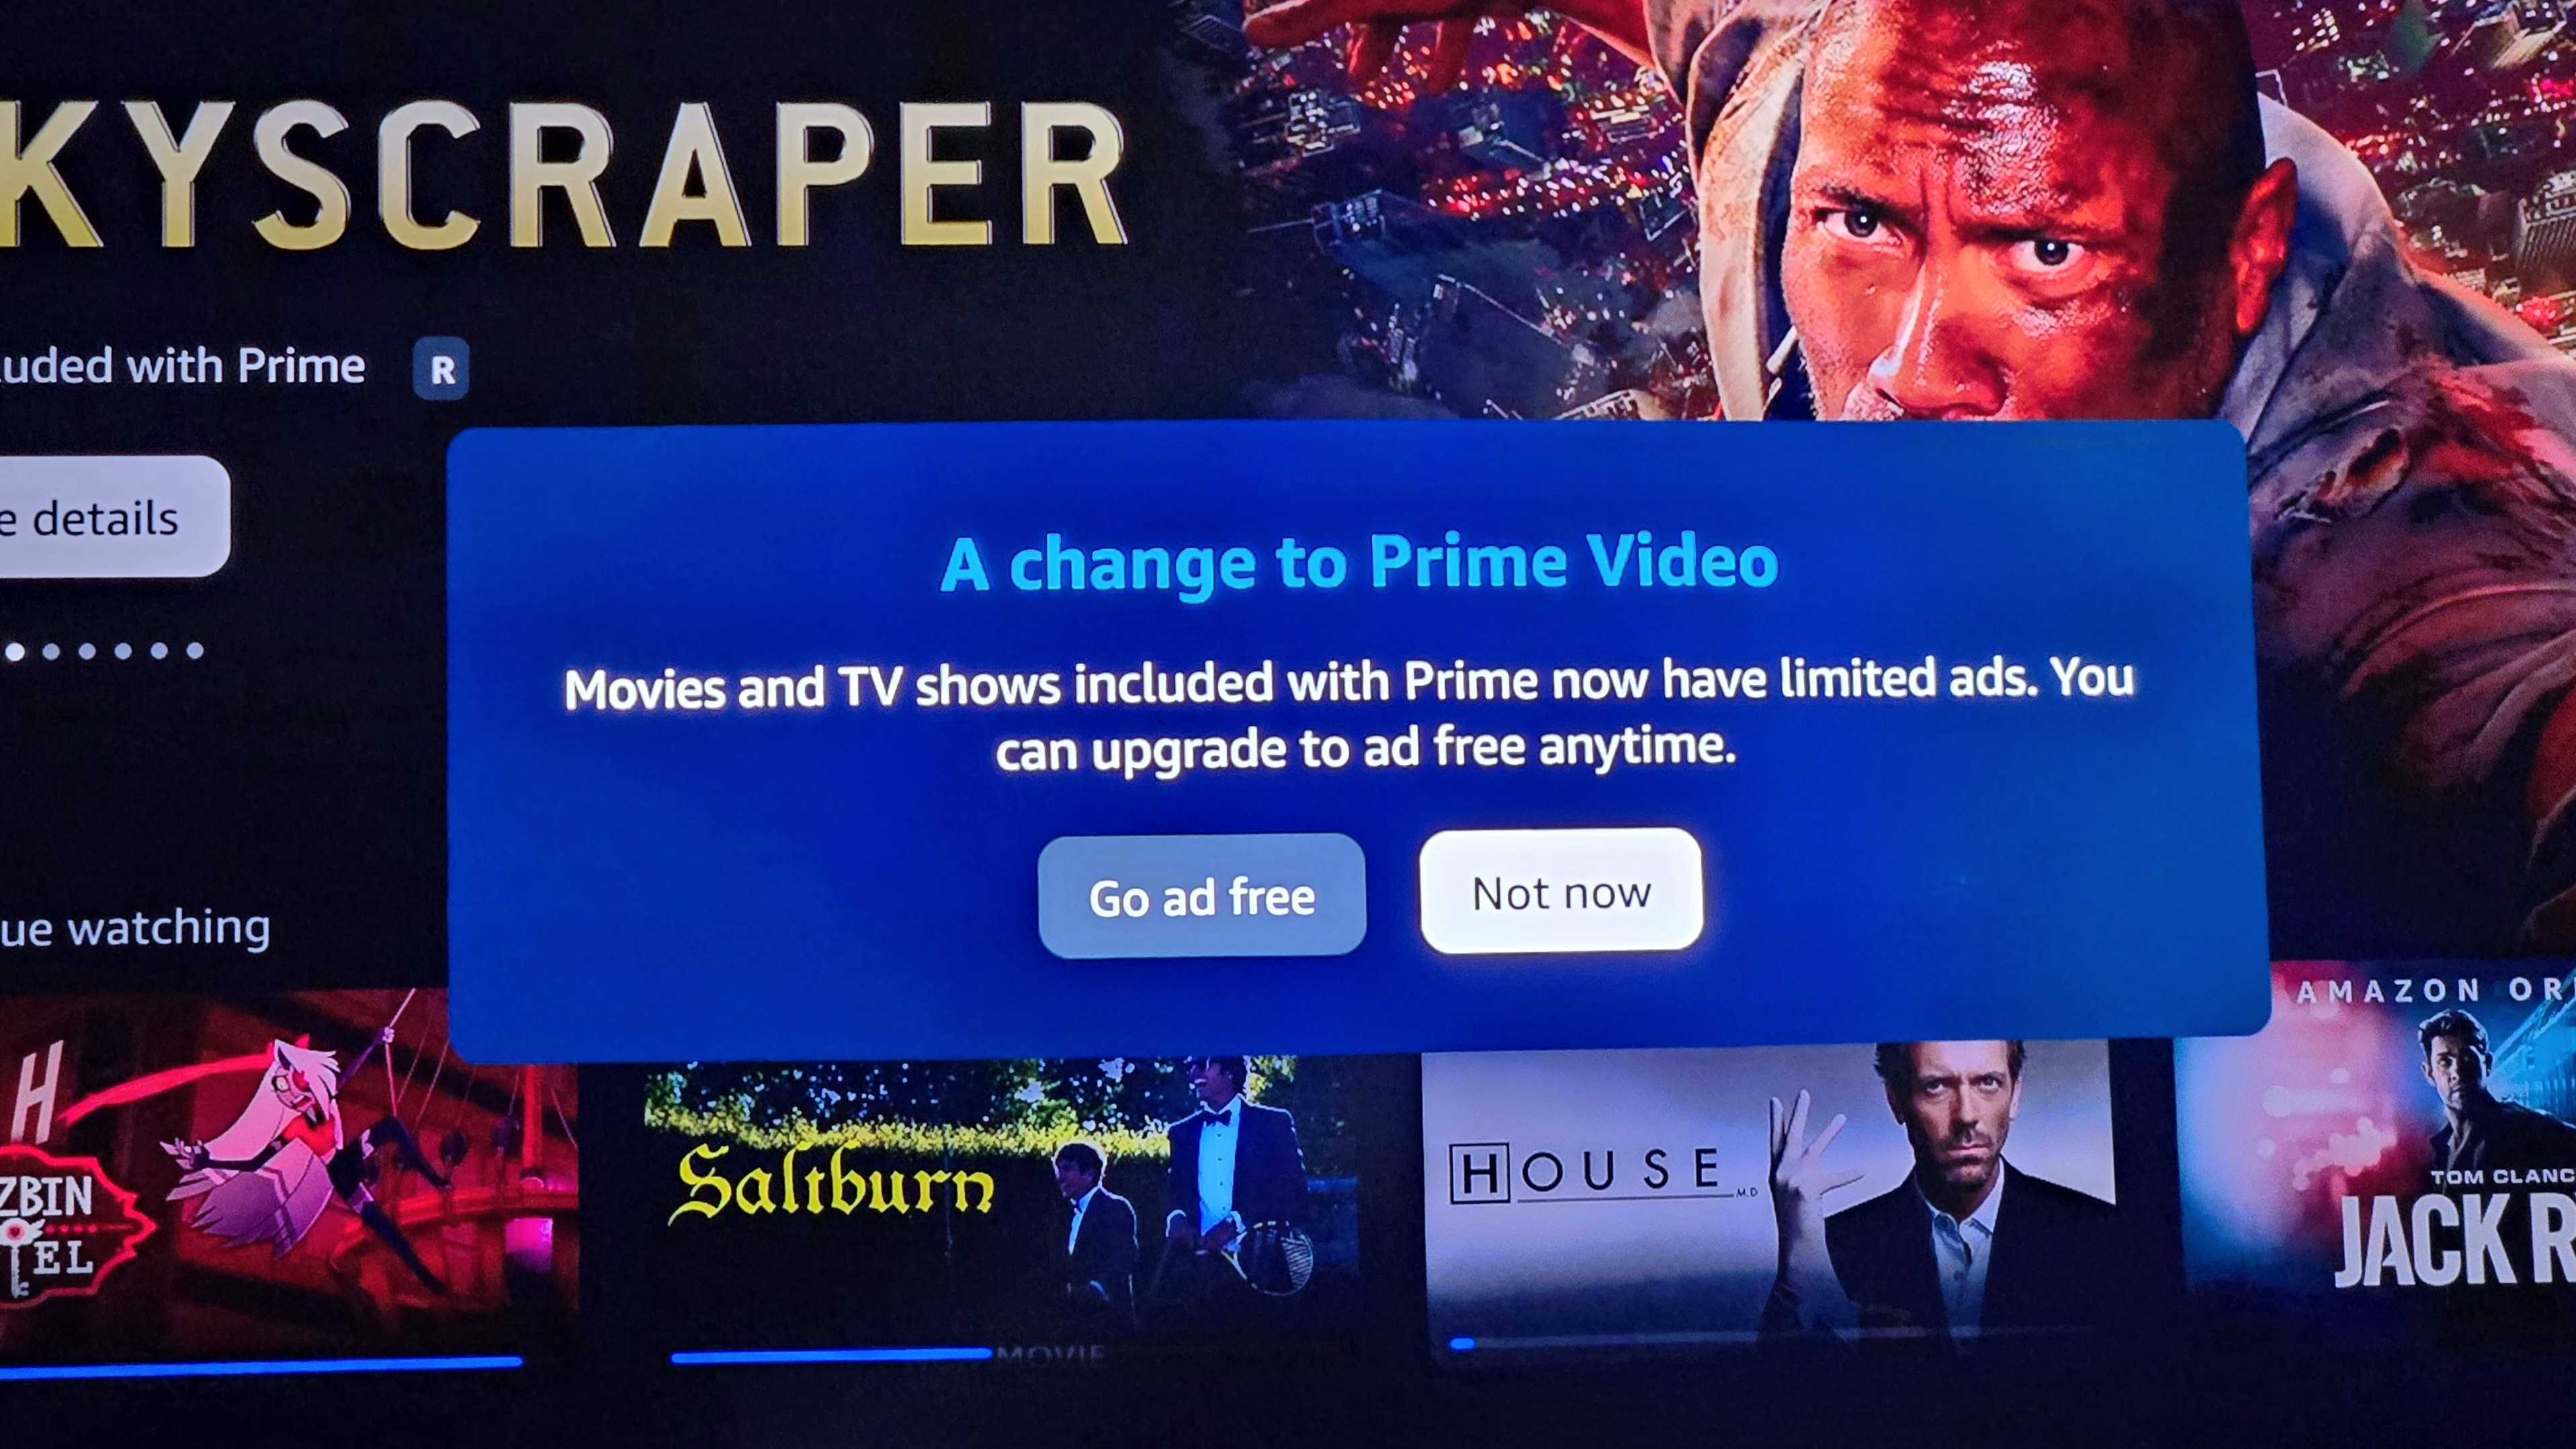 Warning about changes to Amazon Prime Video